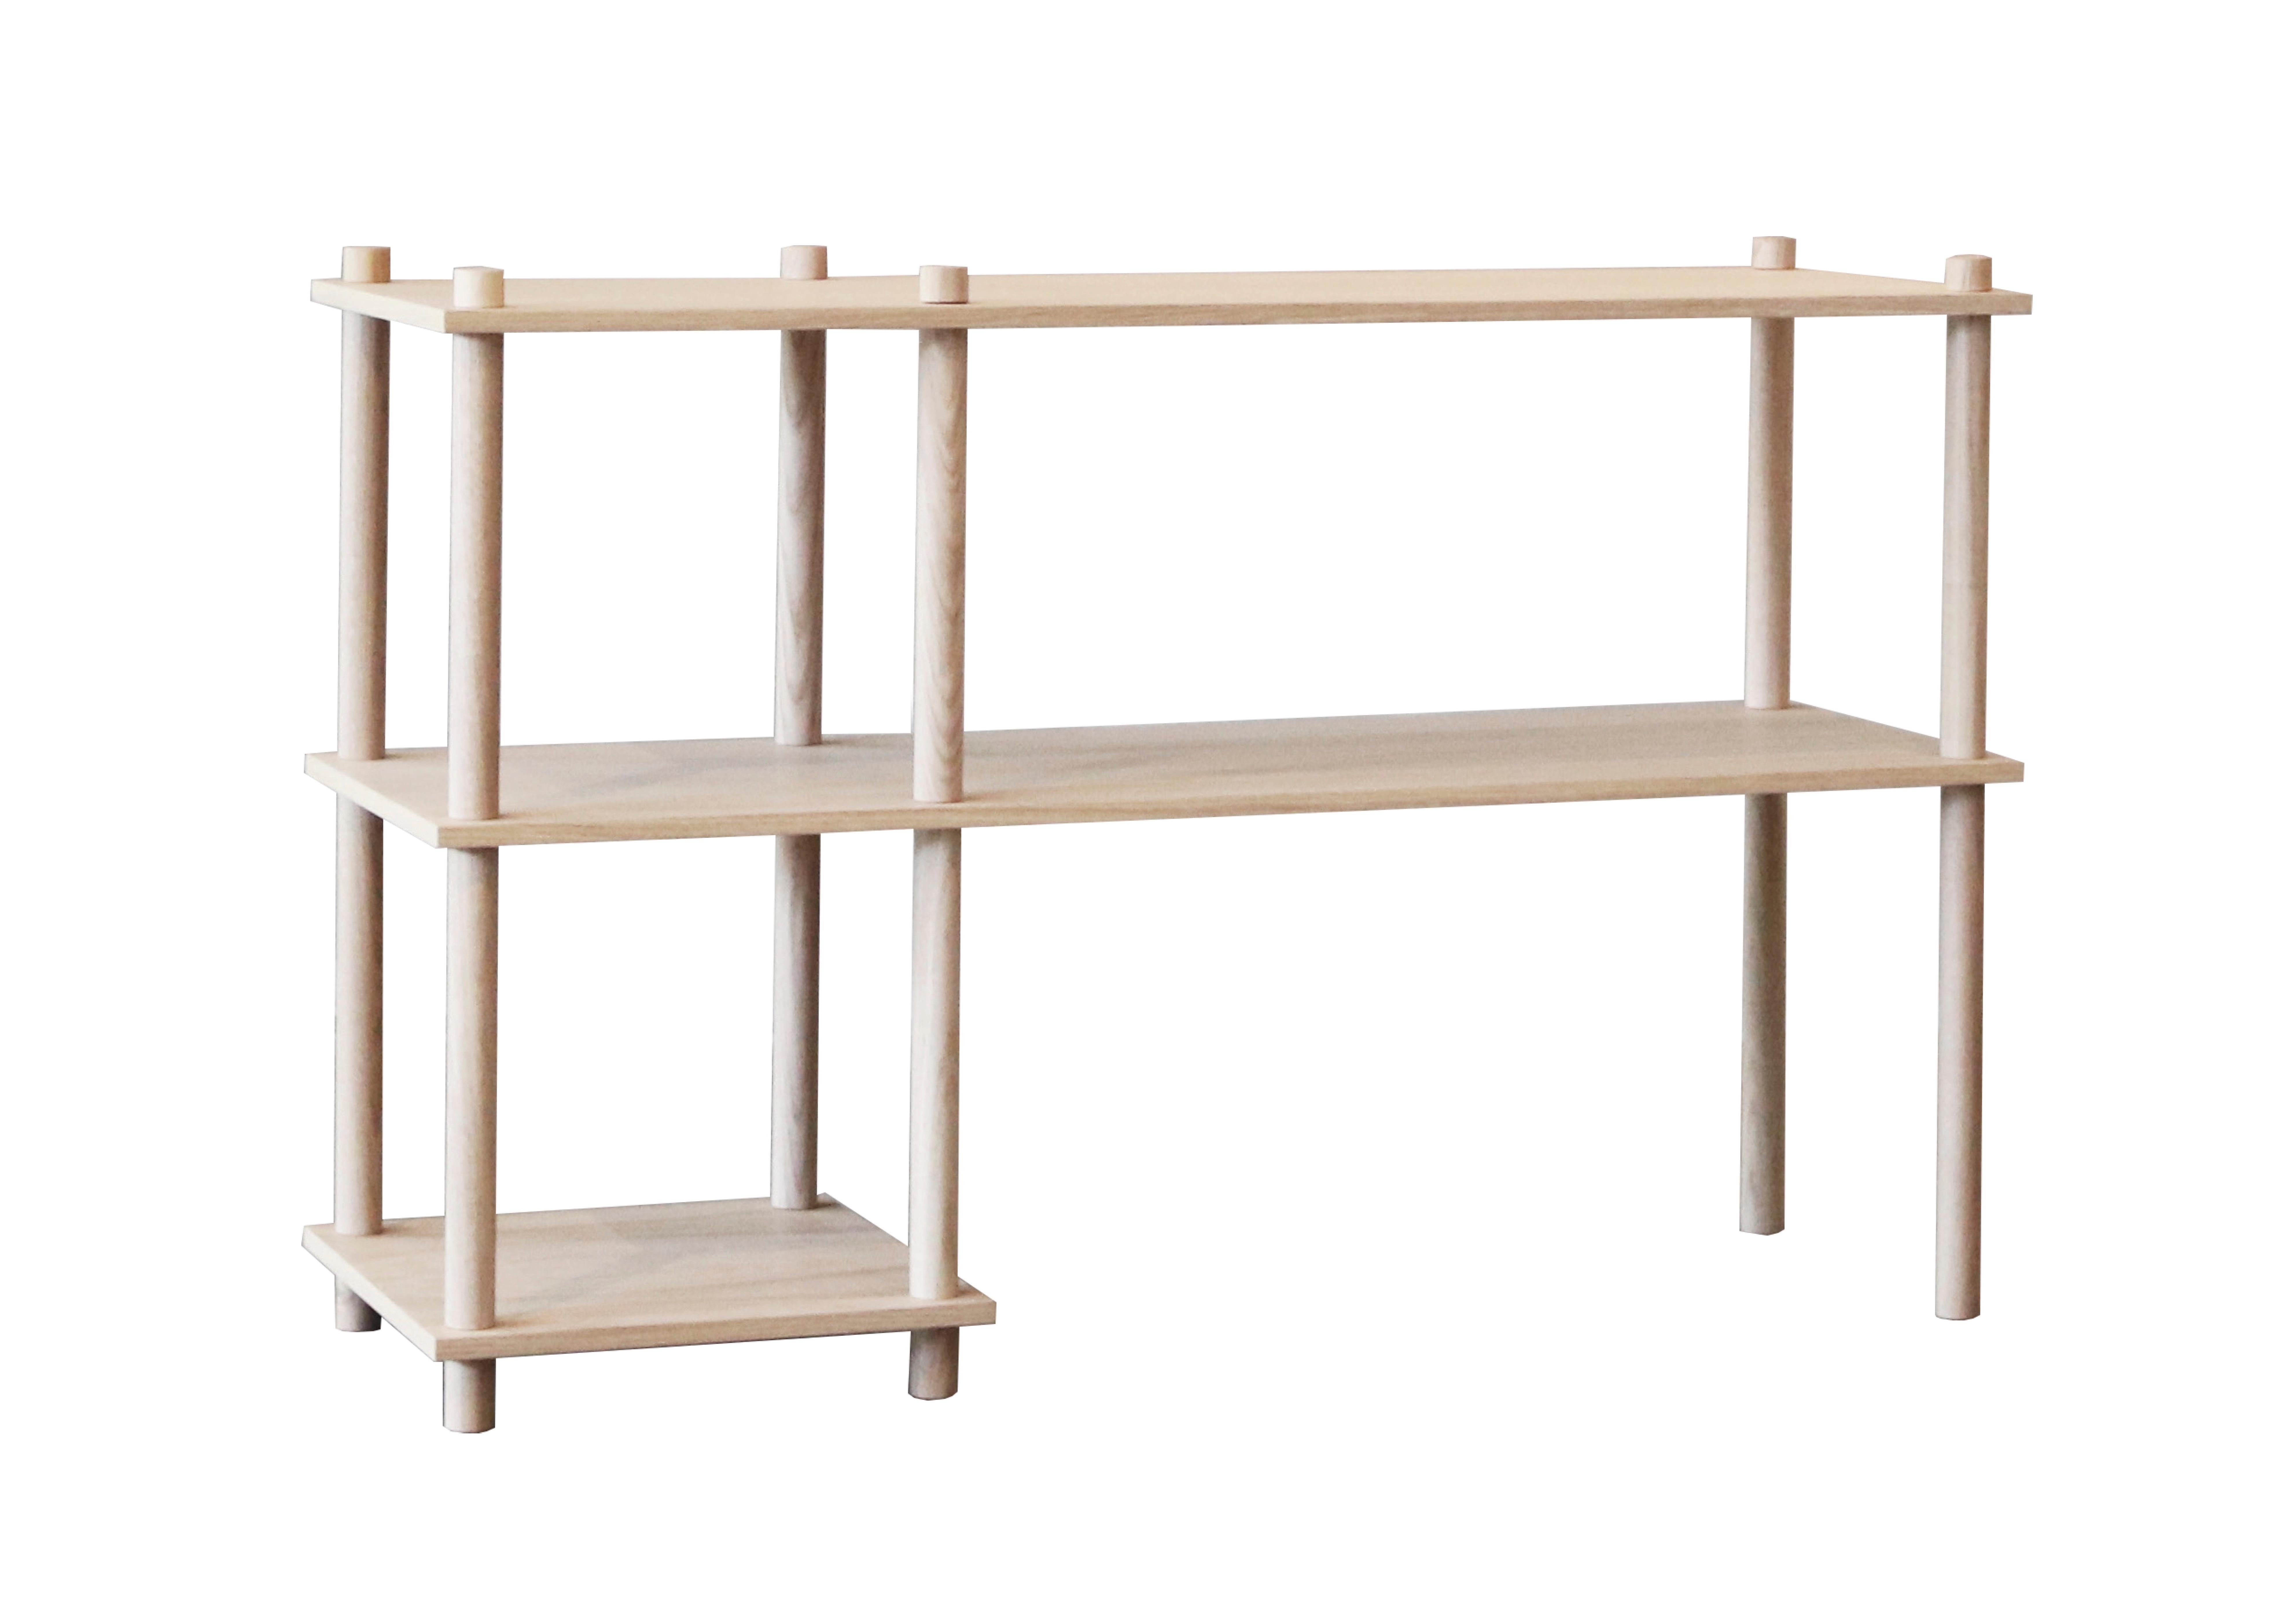 Oak elevate shelving II by Camilla Akersveen and Christopher Konings.
Materials: metal, oak.
Dimensions: D 40 x W 120 x H 78.7 cm.
Available in matt lacquered oak or black oak. Different shelving sistems available.

Camilla Akersveen and